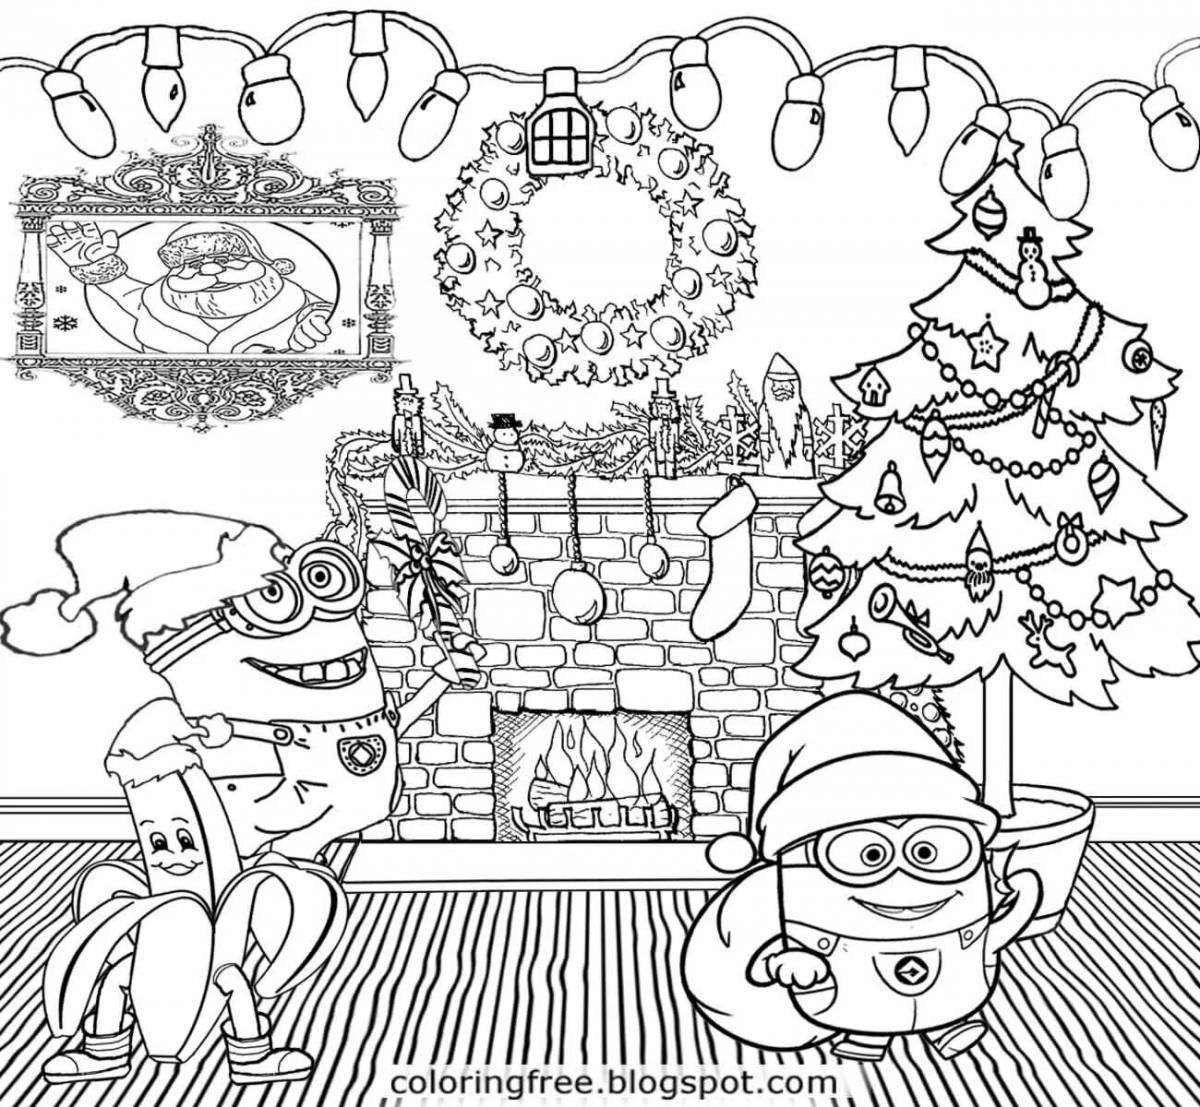 Christmas coloring of minions in bright colors